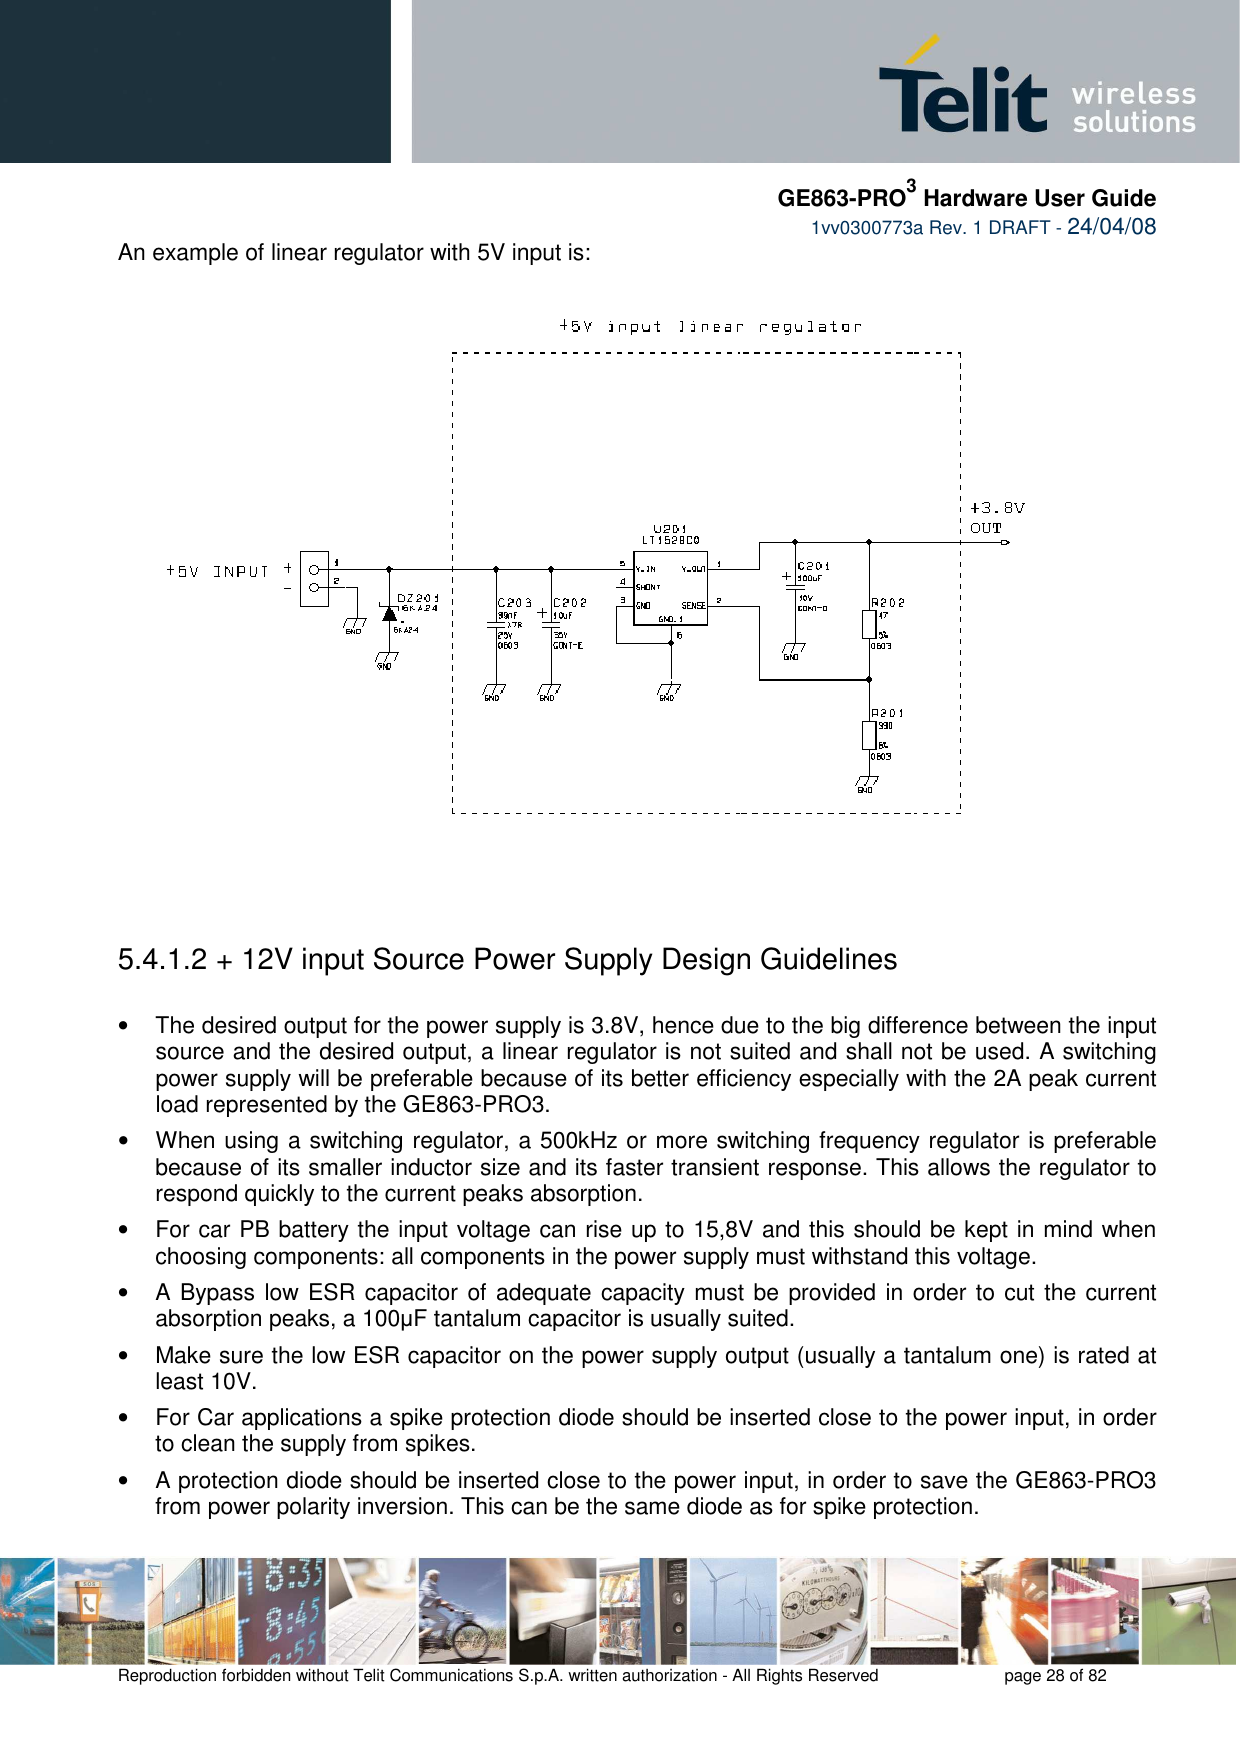     GE863-PRO3 Hardware User Guide  1vv0300773a Rev. 1 DRAFT - 24/04/08    Reproduction forbidden without Telit Communications S.p.A. written authorization - All Rights Reserved    page 28 of 82  An example of linear regulator with 5V input is:      5.4.1.2  + 12V input Source Power Supply Design Guidelines  •  The desired output for the power supply is 3.8V, hence due to the big difference between the input source and the desired output, a linear regulator is not suited and shall not be used. A switching power supply will be preferable because of its better efficiency especially with the 2A peak current load represented by the GE863-PRO3. •  When using a switching regulator, a 500kHz or more switching frequency regulator is preferable because of its smaller inductor size and its faster transient response. This allows the regulator to respond quickly to the current peaks absorption.  •  For car PB battery the input voltage can rise up to 15,8V and this should be kept in mind when choosing components: all components in the power supply must withstand this voltage. •  A Bypass low ESR capacitor of adequate capacity must be provided in order to cut  the current absorption peaks, a 100µF tantalum capacitor is usually suited. •  Make sure the low ESR capacitor on the power supply output (usually a tantalum one) is rated at least 10V. •  For Car applications a spike protection diode should be inserted close to the power input, in order to clean the supply from spikes.  •  A protection diode should be inserted close to the power input, in order to save the GE863-PRO3  from power polarity inversion. This can be the same diode as for spike protection. 